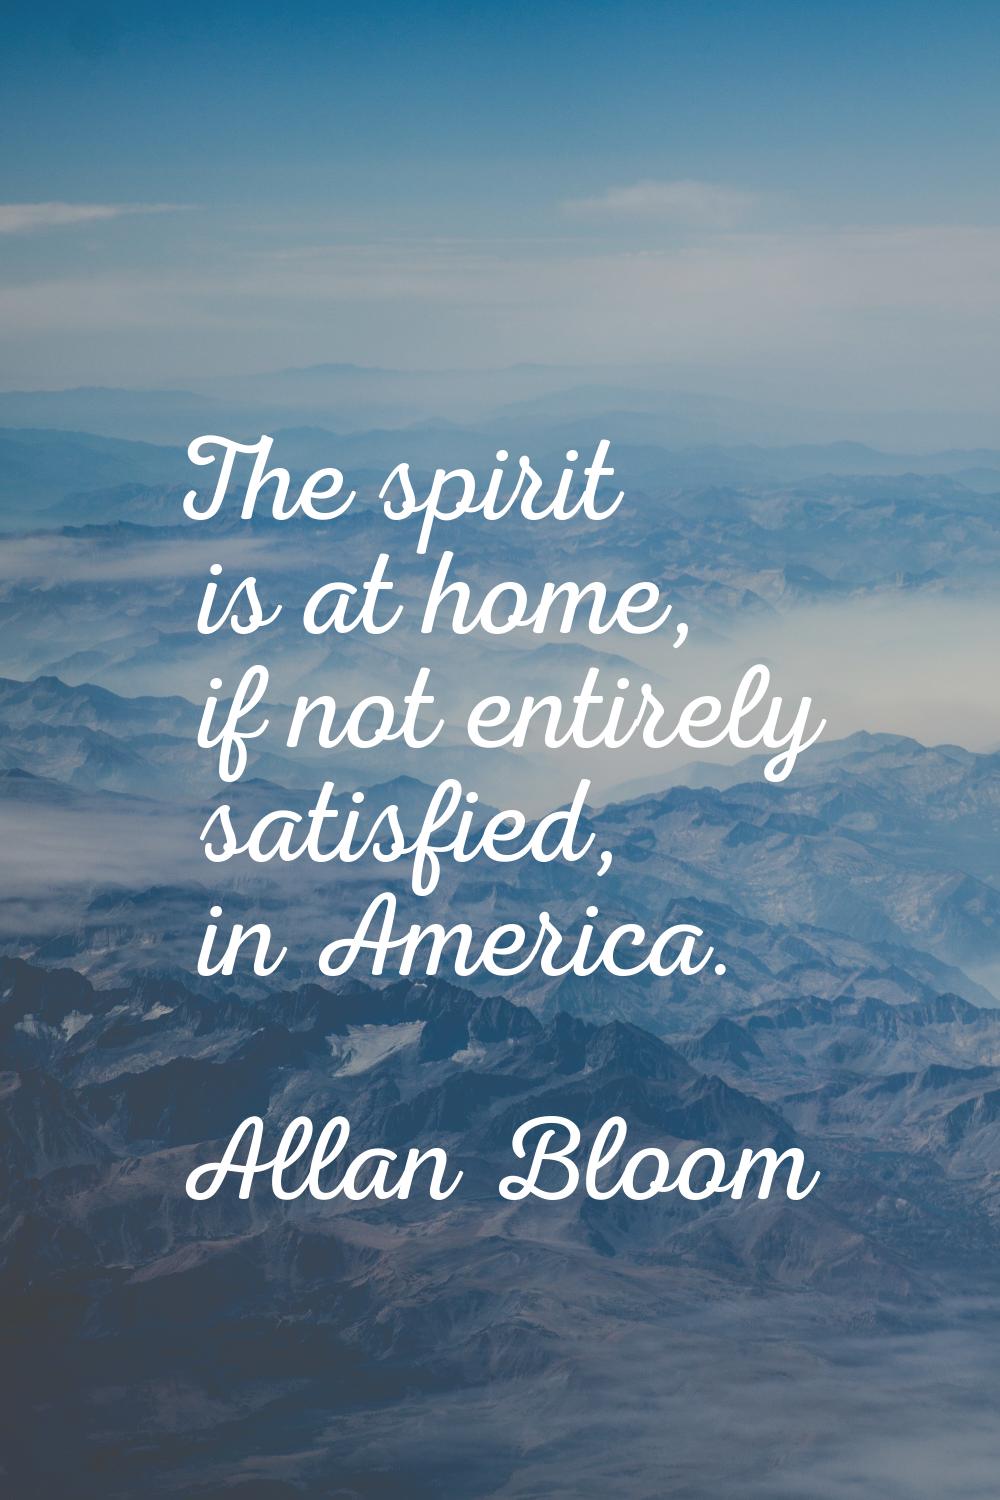 The spirit is at home, if not entirely satisfied, in America.